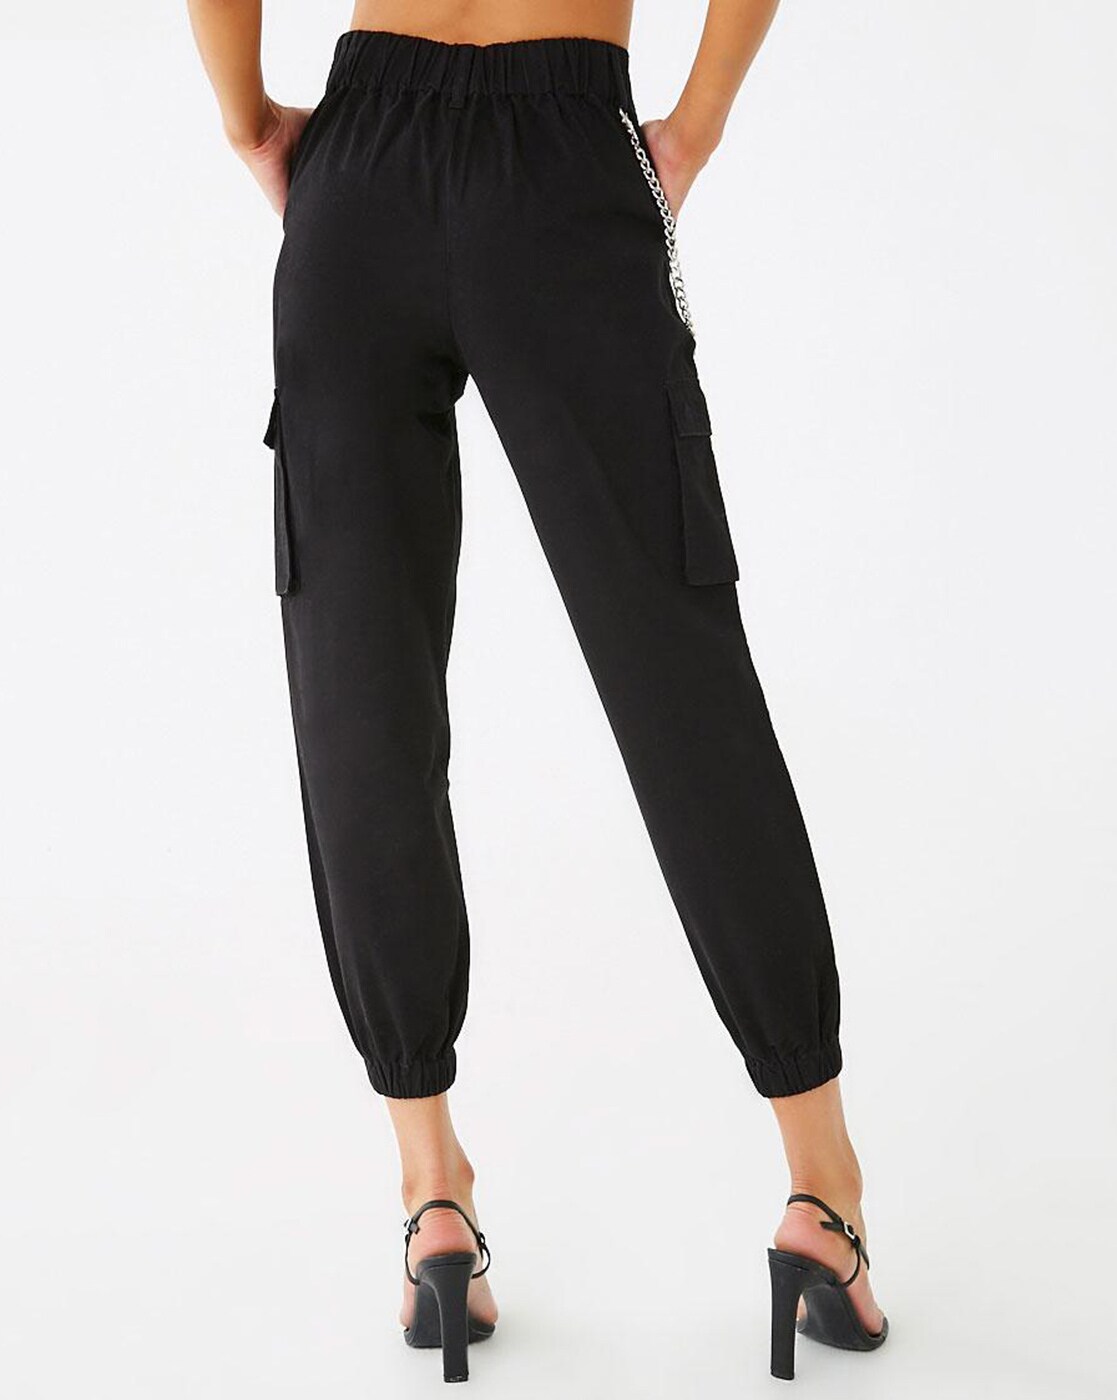 Womens Loose Fit Cargo Pants With Chain Buckle  RebelsMarket